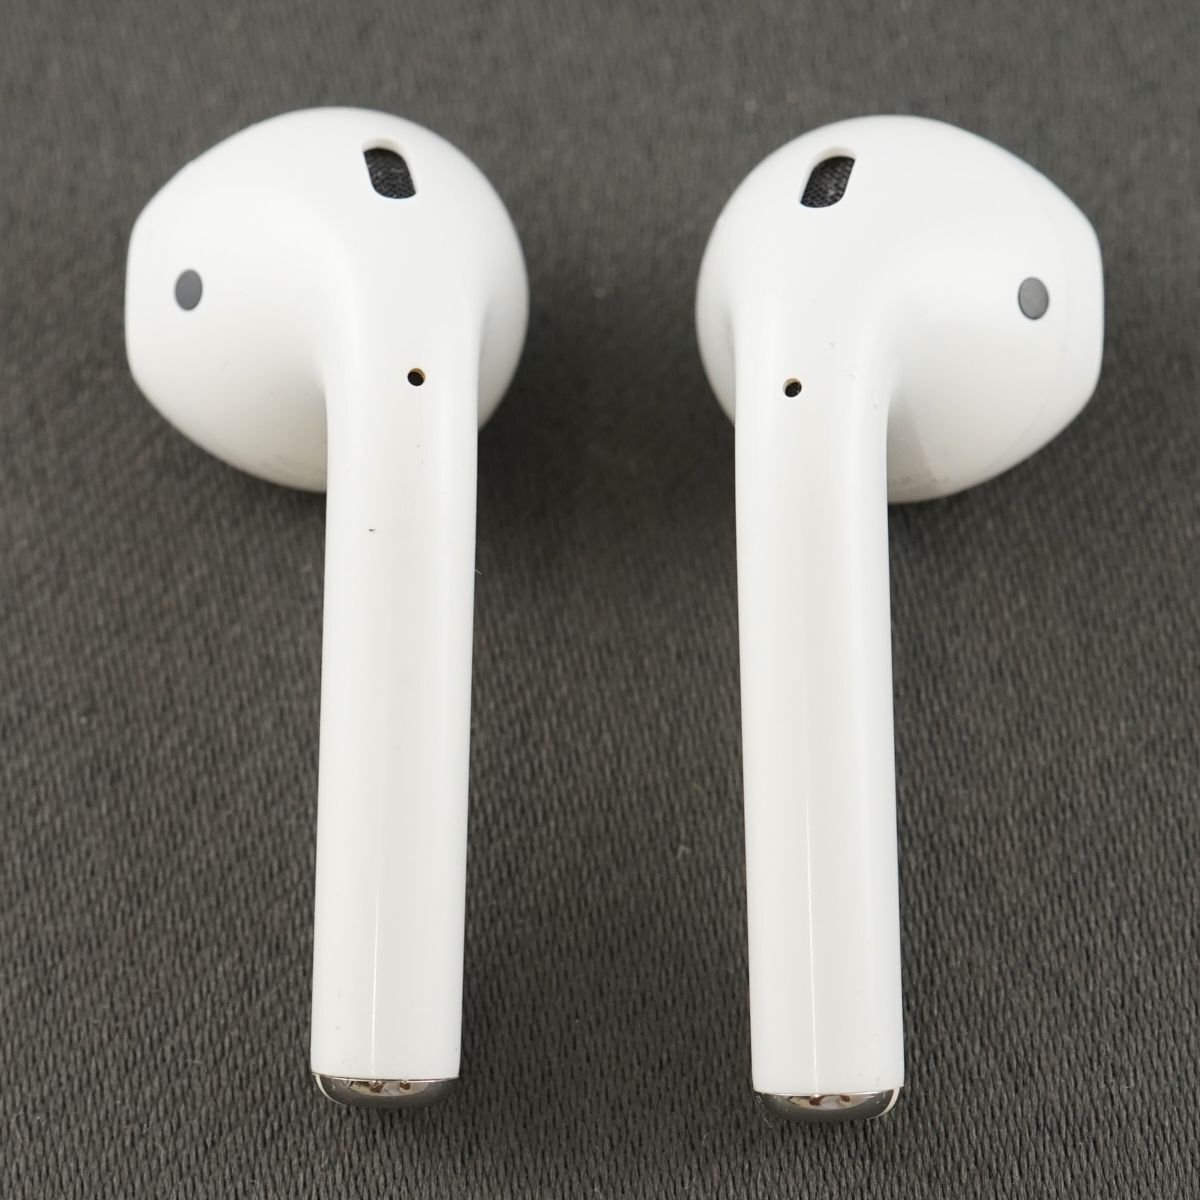 Apple AirPods with Wireless Charging Case エアーポッズ イヤホン ワイヤレスチャージング Qi USED品 第二世代 MRXJ2J/A 完動品 V9297_画像3